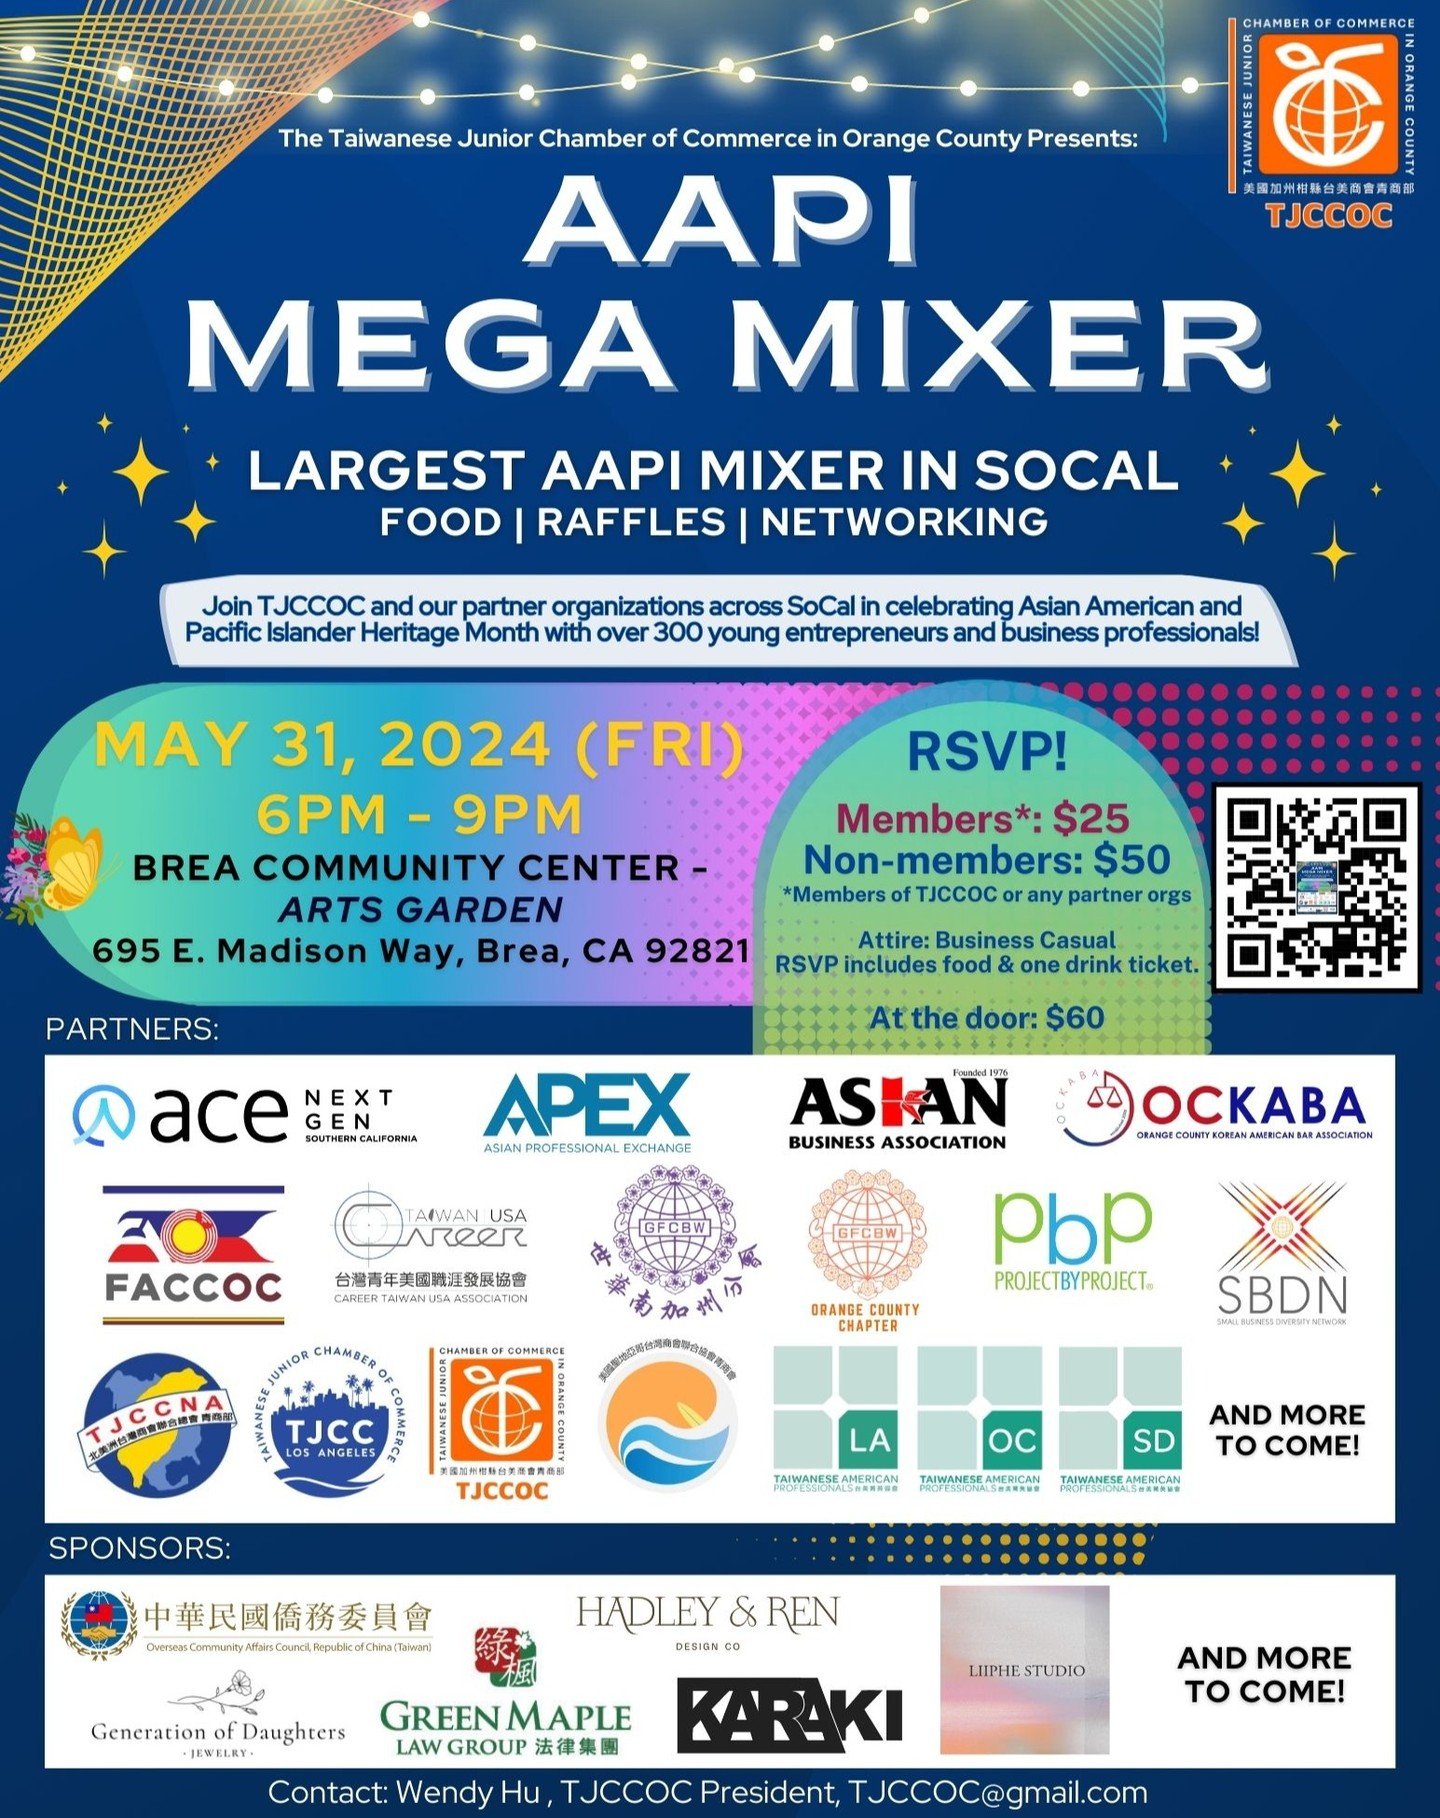 APEX is proud to be a community partner of this year's AAPI Mega Mixer!

*Date: May 31, 2024 (Friday)
*Time: 6pm - 9pm 
*Location: Brea Community Center - Arts Garden, 695 E. Madison Way, Brea, CA 92821
*Tickets: $50 / At the door: $60 (Use our 50% d